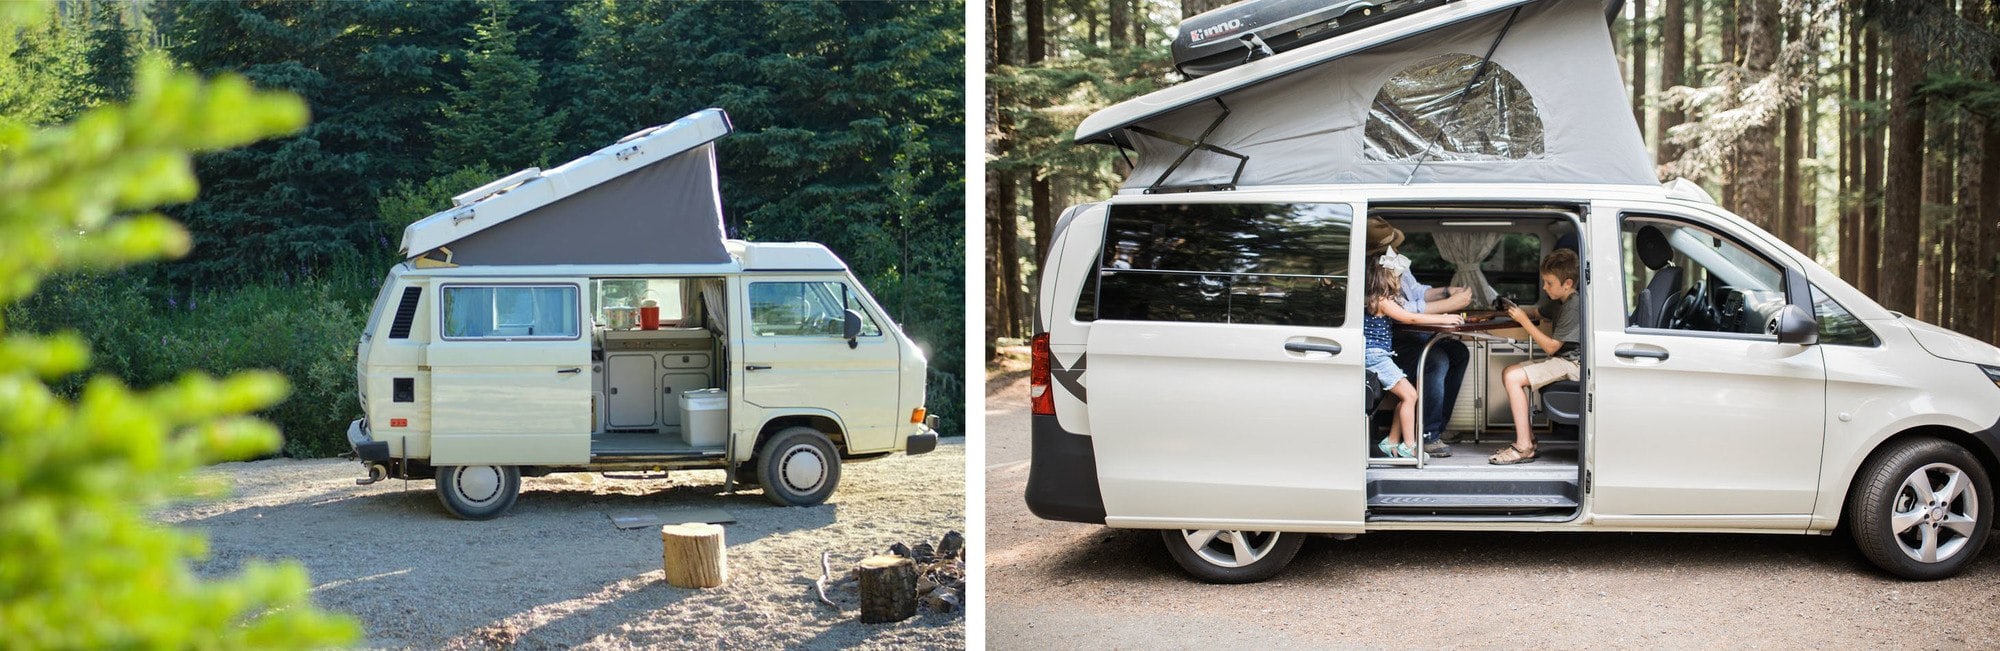 Peace Van Rentals // Rent an adventure mobile from one of these camper van rental companies & choose from Sprinters, Vanagons, Ford Transits, Sportsmobiles & more!